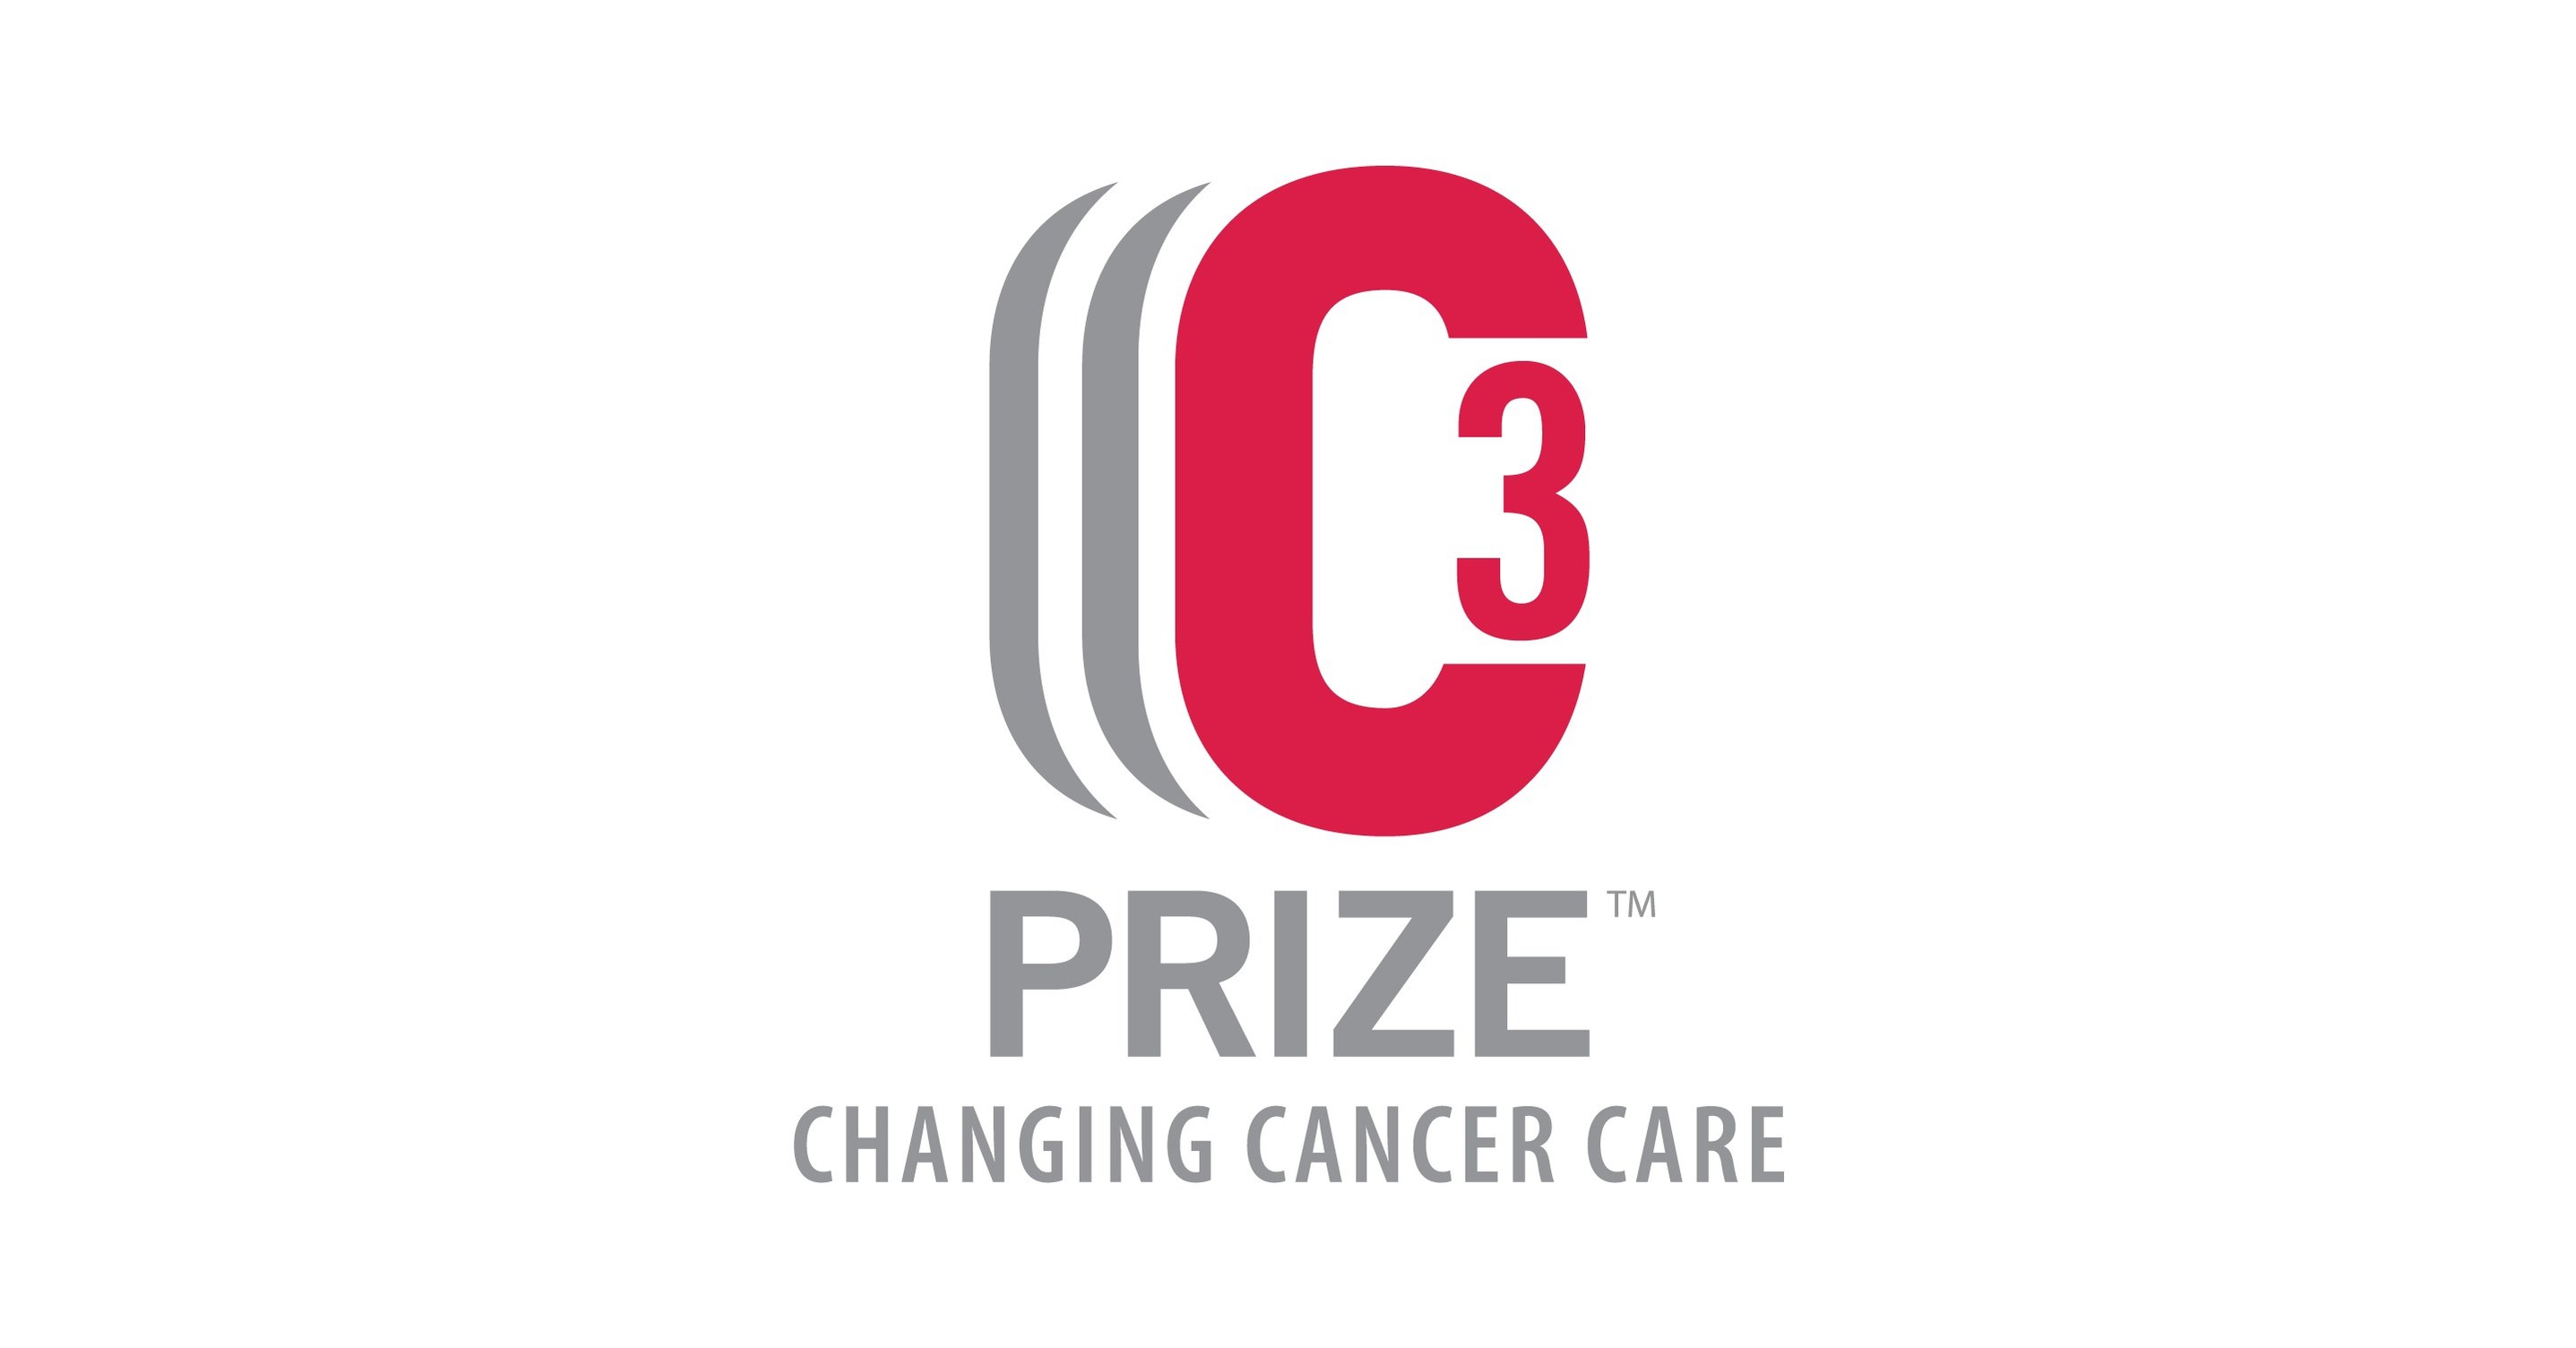 Astellas Oncology Announces Grand Prize Winner of Fifth Annual C³ Prize® Challenge